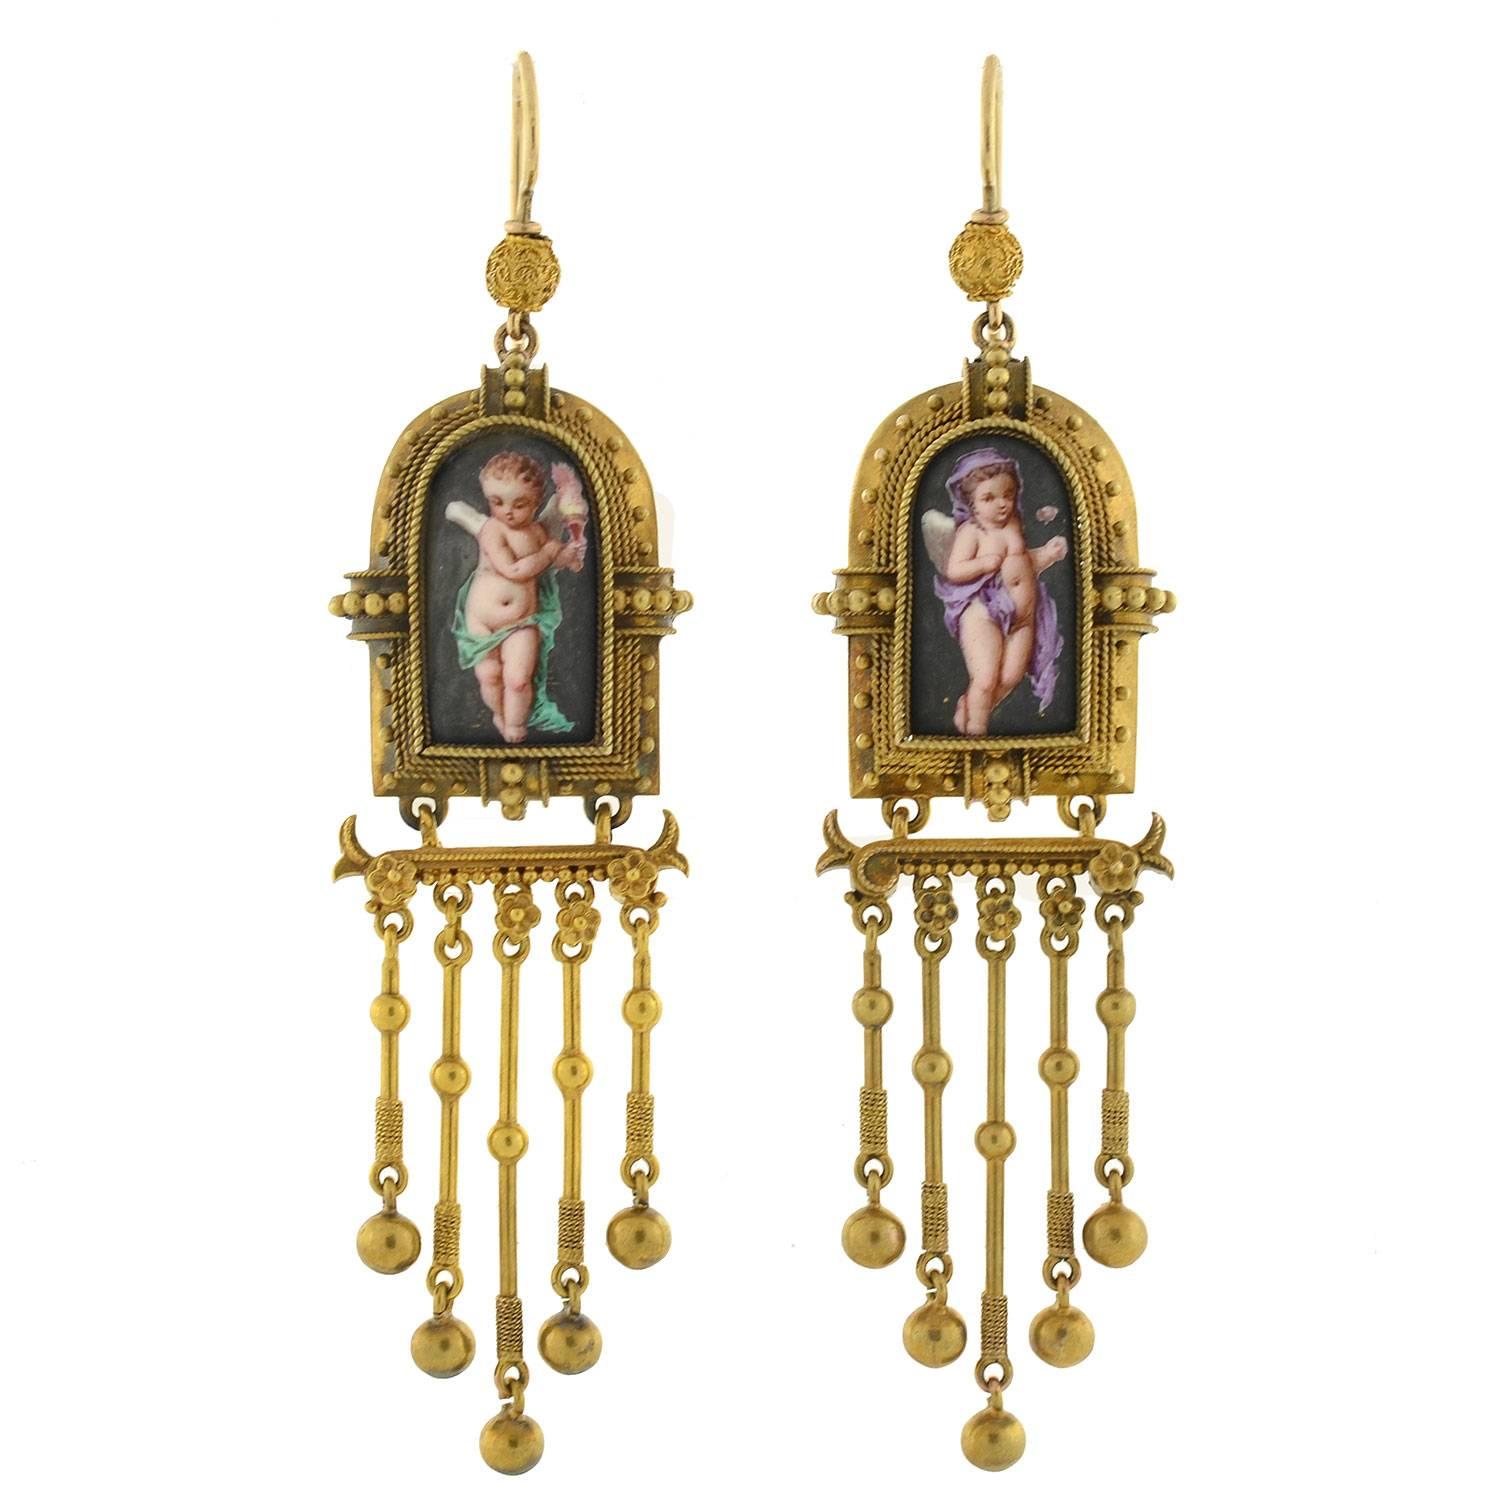 An absolutely beautiful porcelain earring and pendant set from the Victorian (ca1880) era! Fit for a piece in a museum, this wonderful set is comprised of a pair of earrings and a complimentary pendant. These three pieces depict a different, but